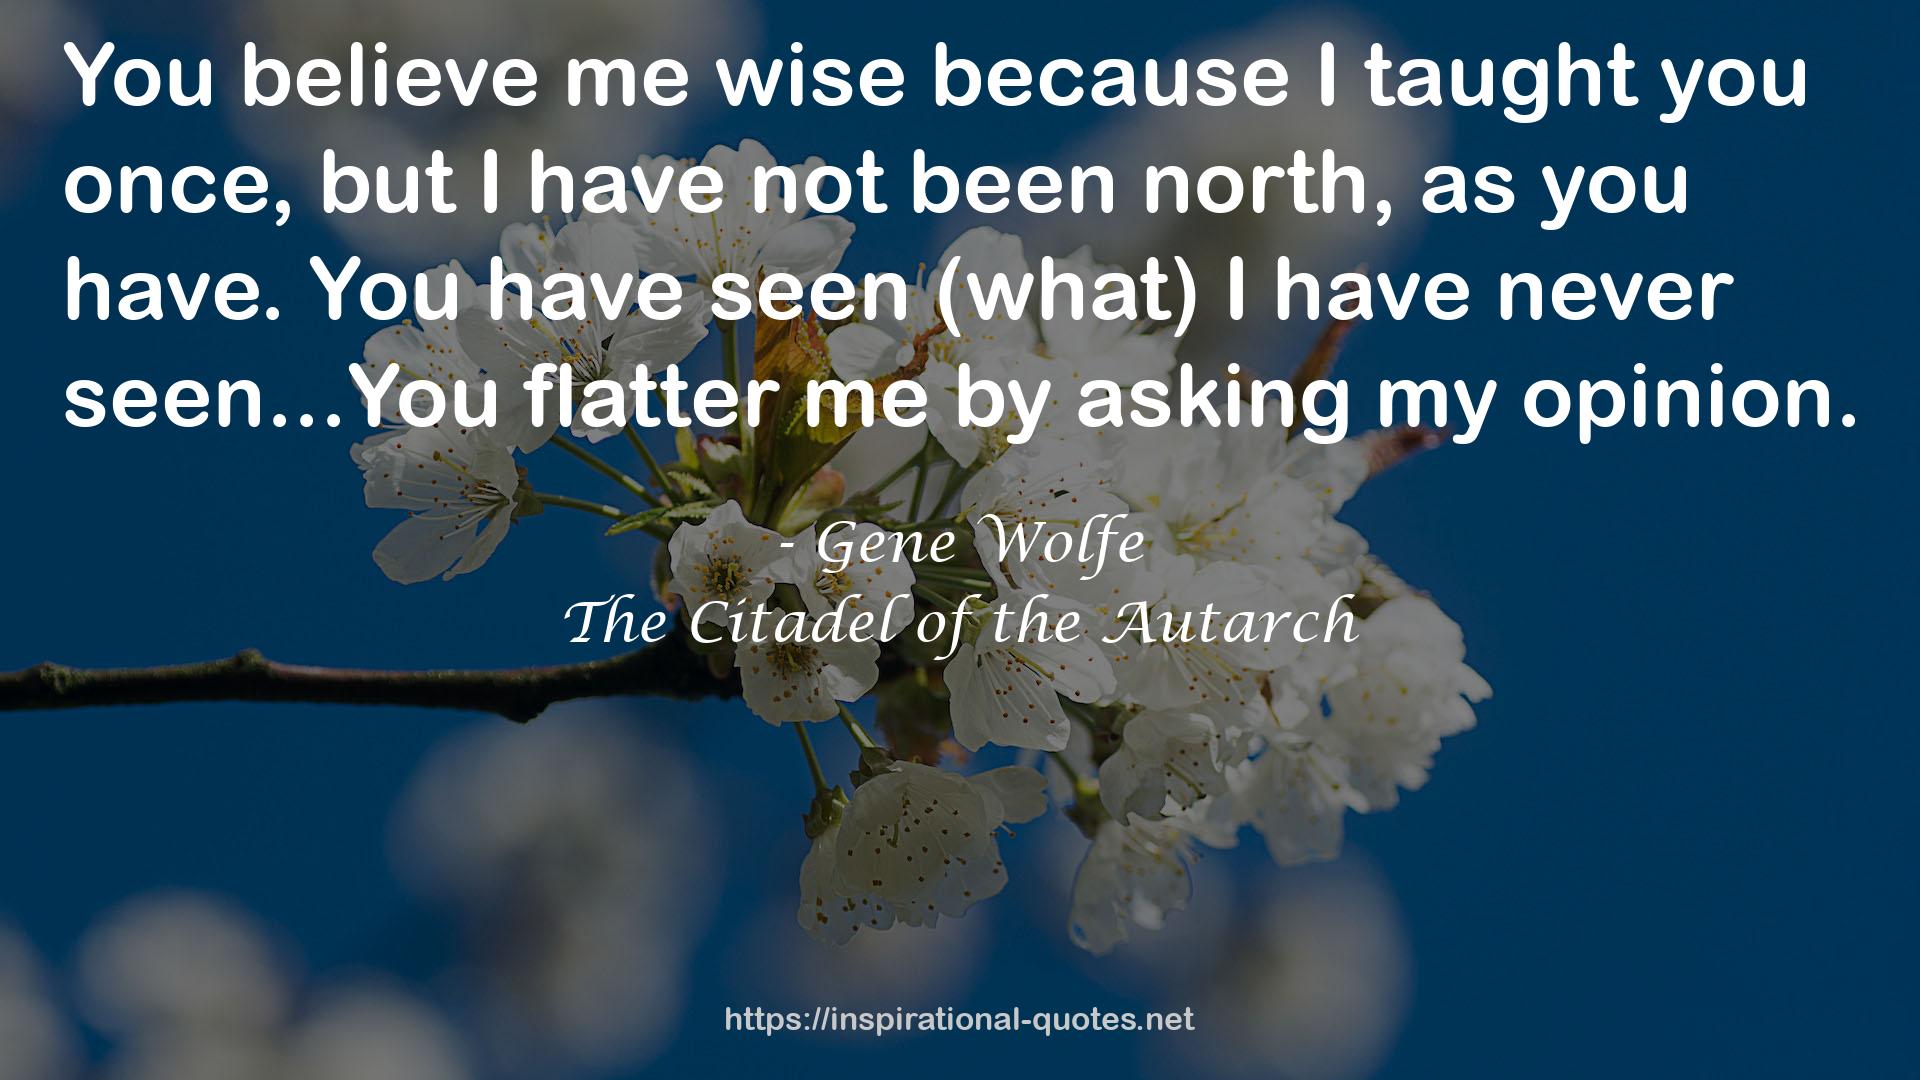 The Citadel of the Autarch QUOTES